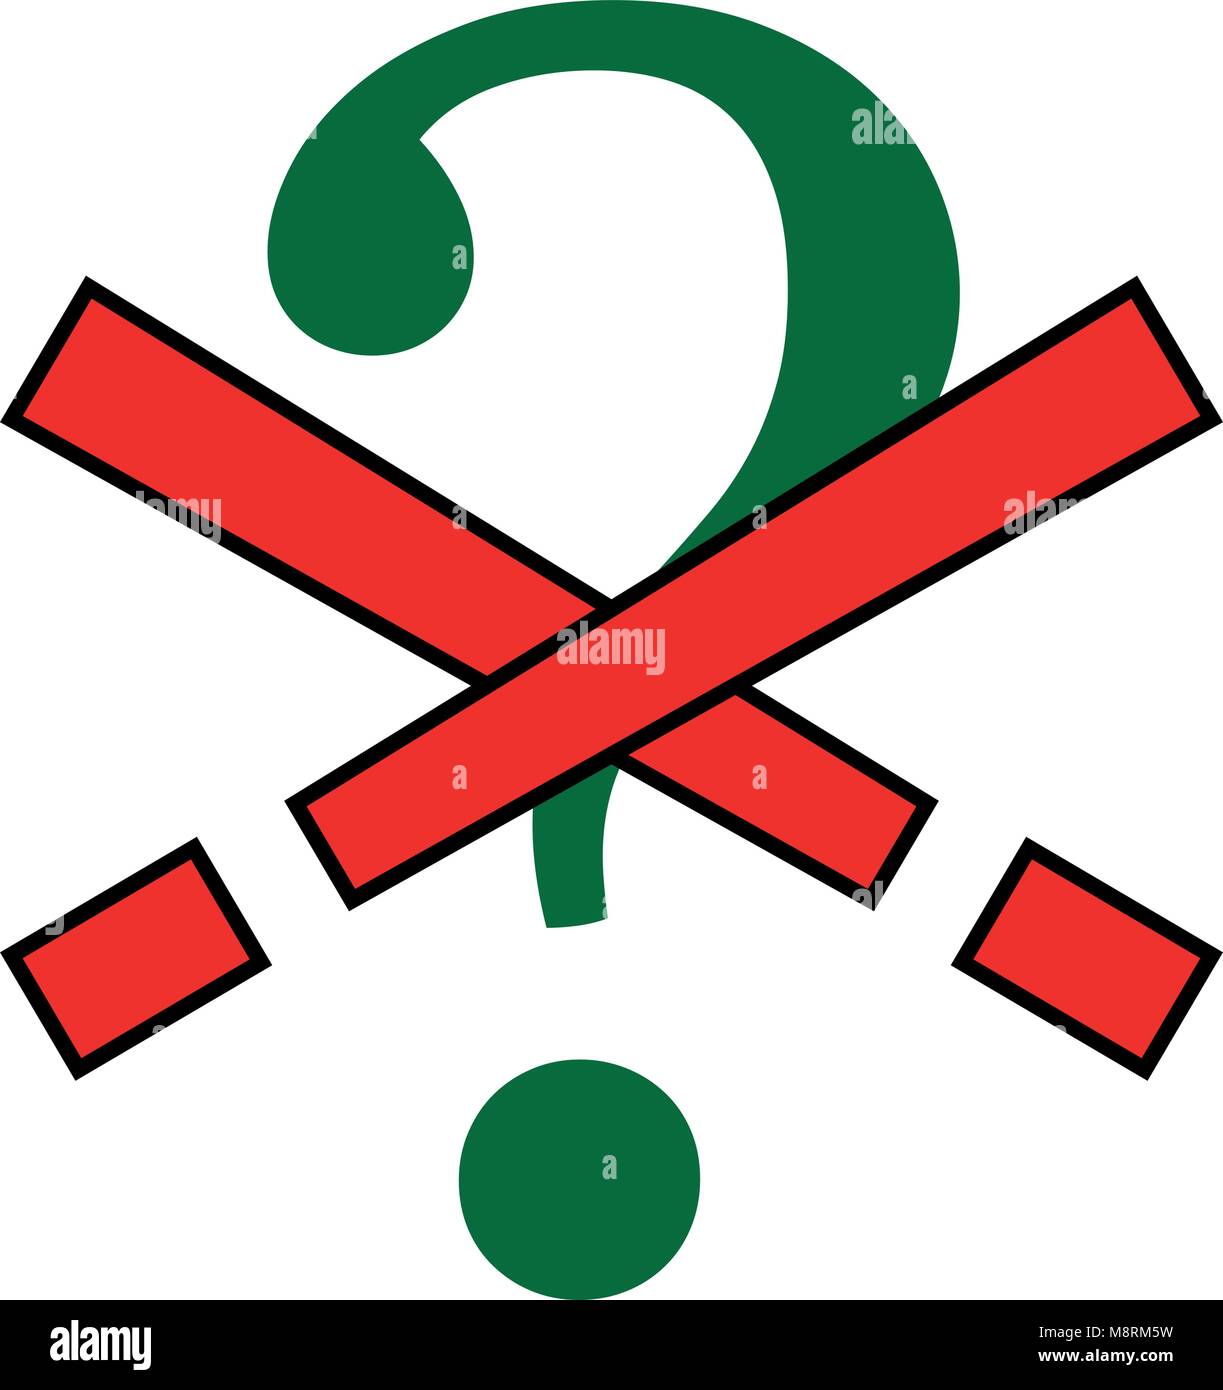 Vector illustration of question mark crossed out by 2 exclamation points as a visual metaphor of freedom of speech, questioning the power, status quo, Stock Vector